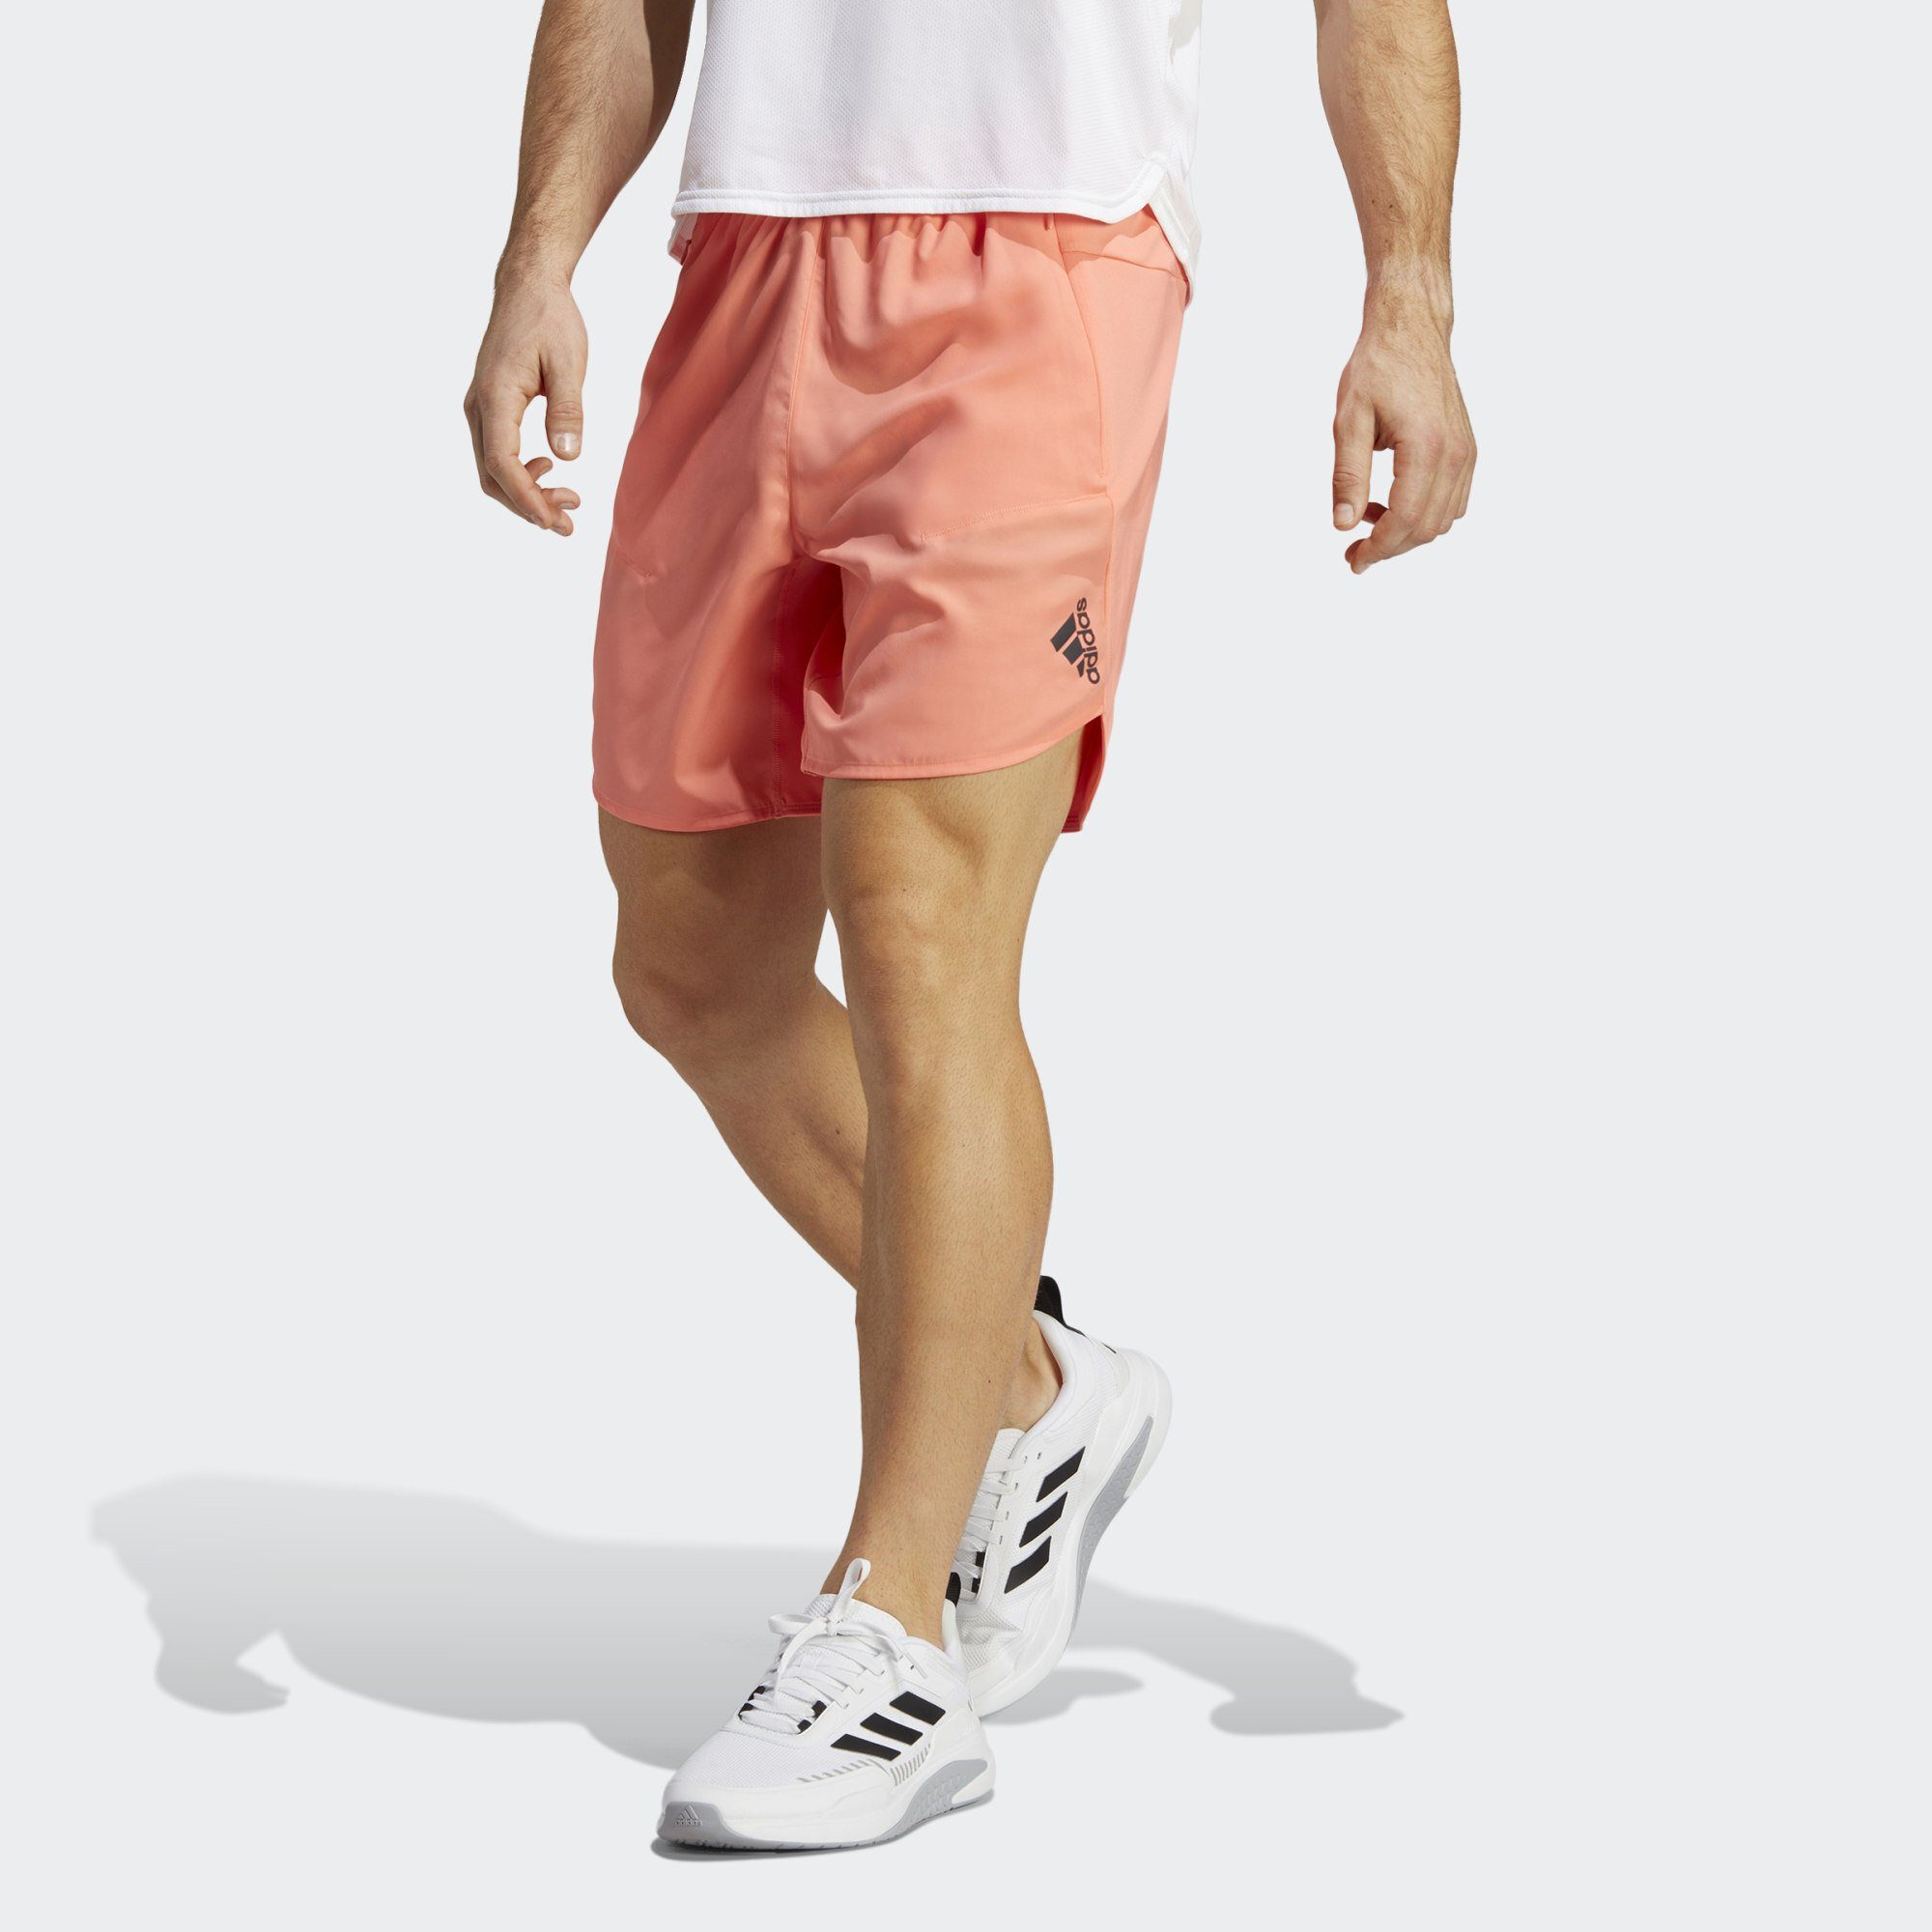 adidas Performance Funktionsshorts DESIGNED TRAINING Coral SHORTS FOR Fusion